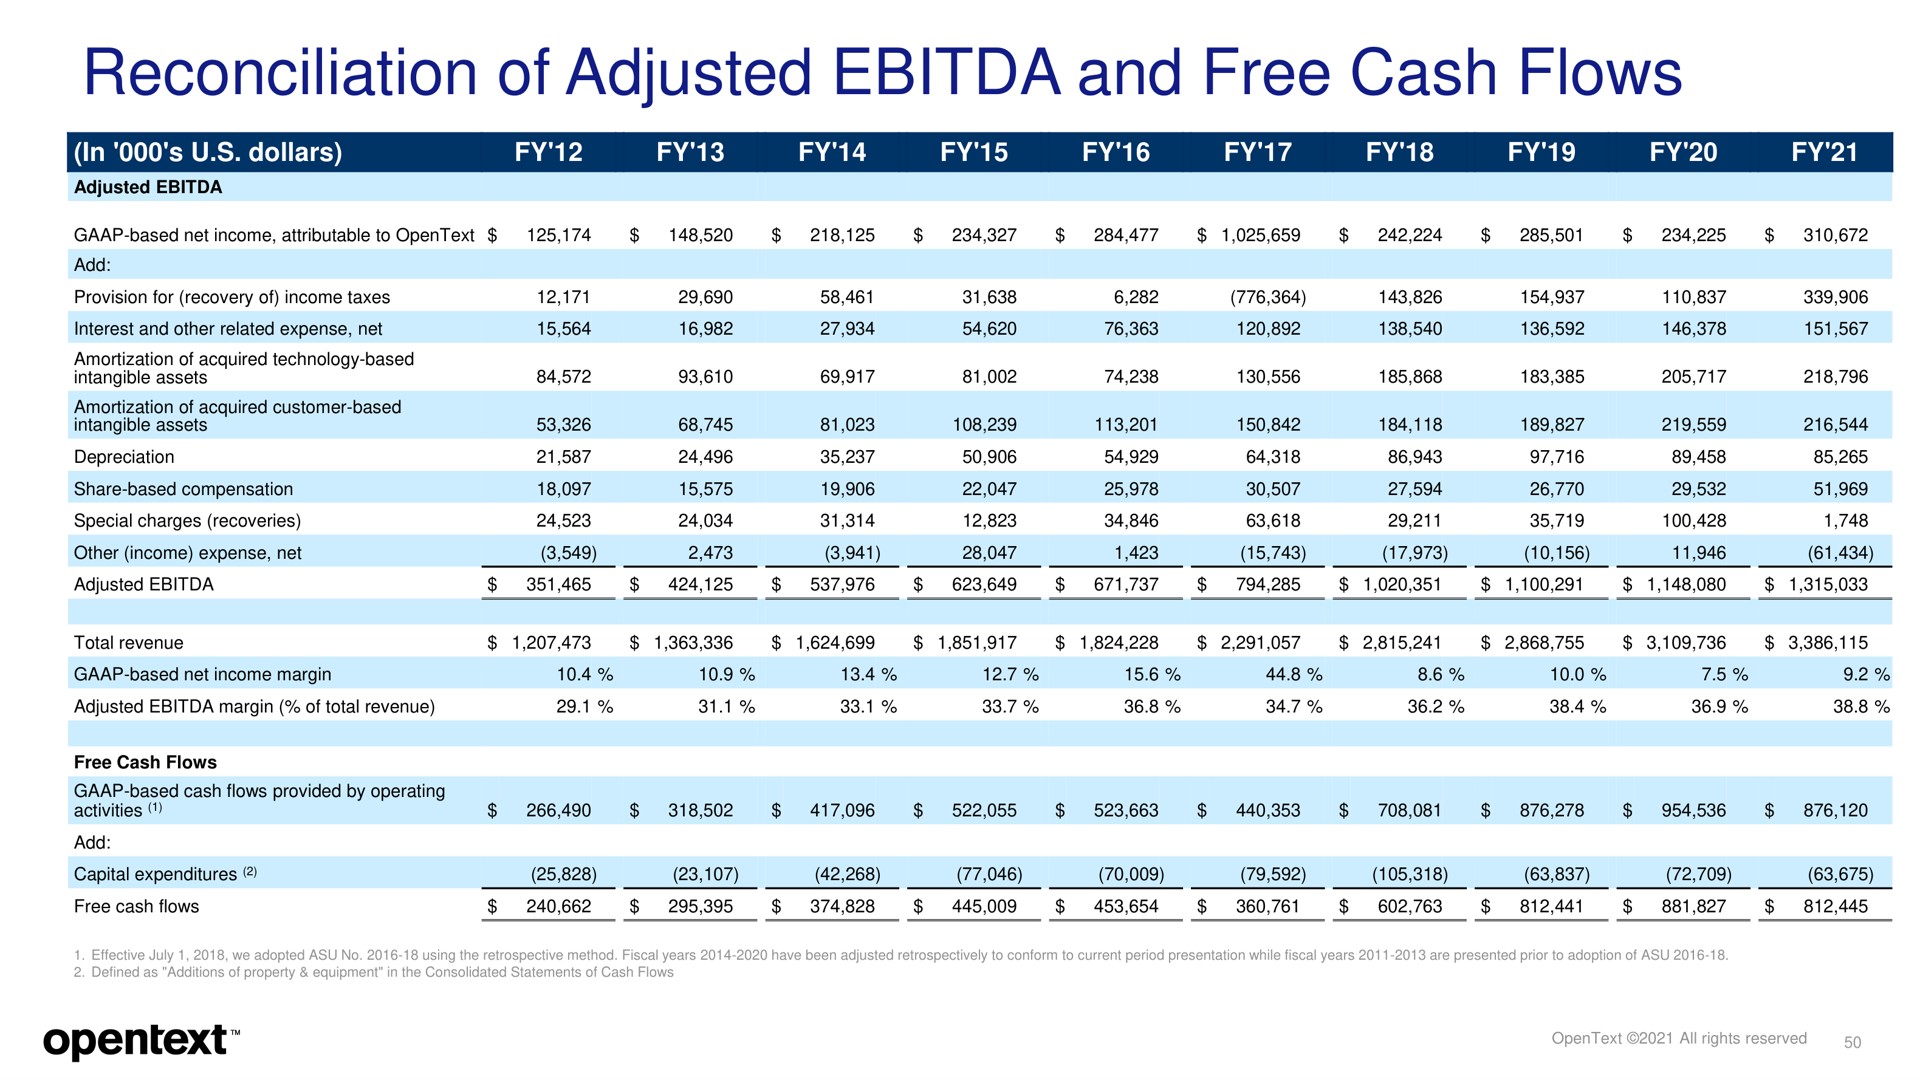 reconciliation of adjusted and free cash flows | OpenText